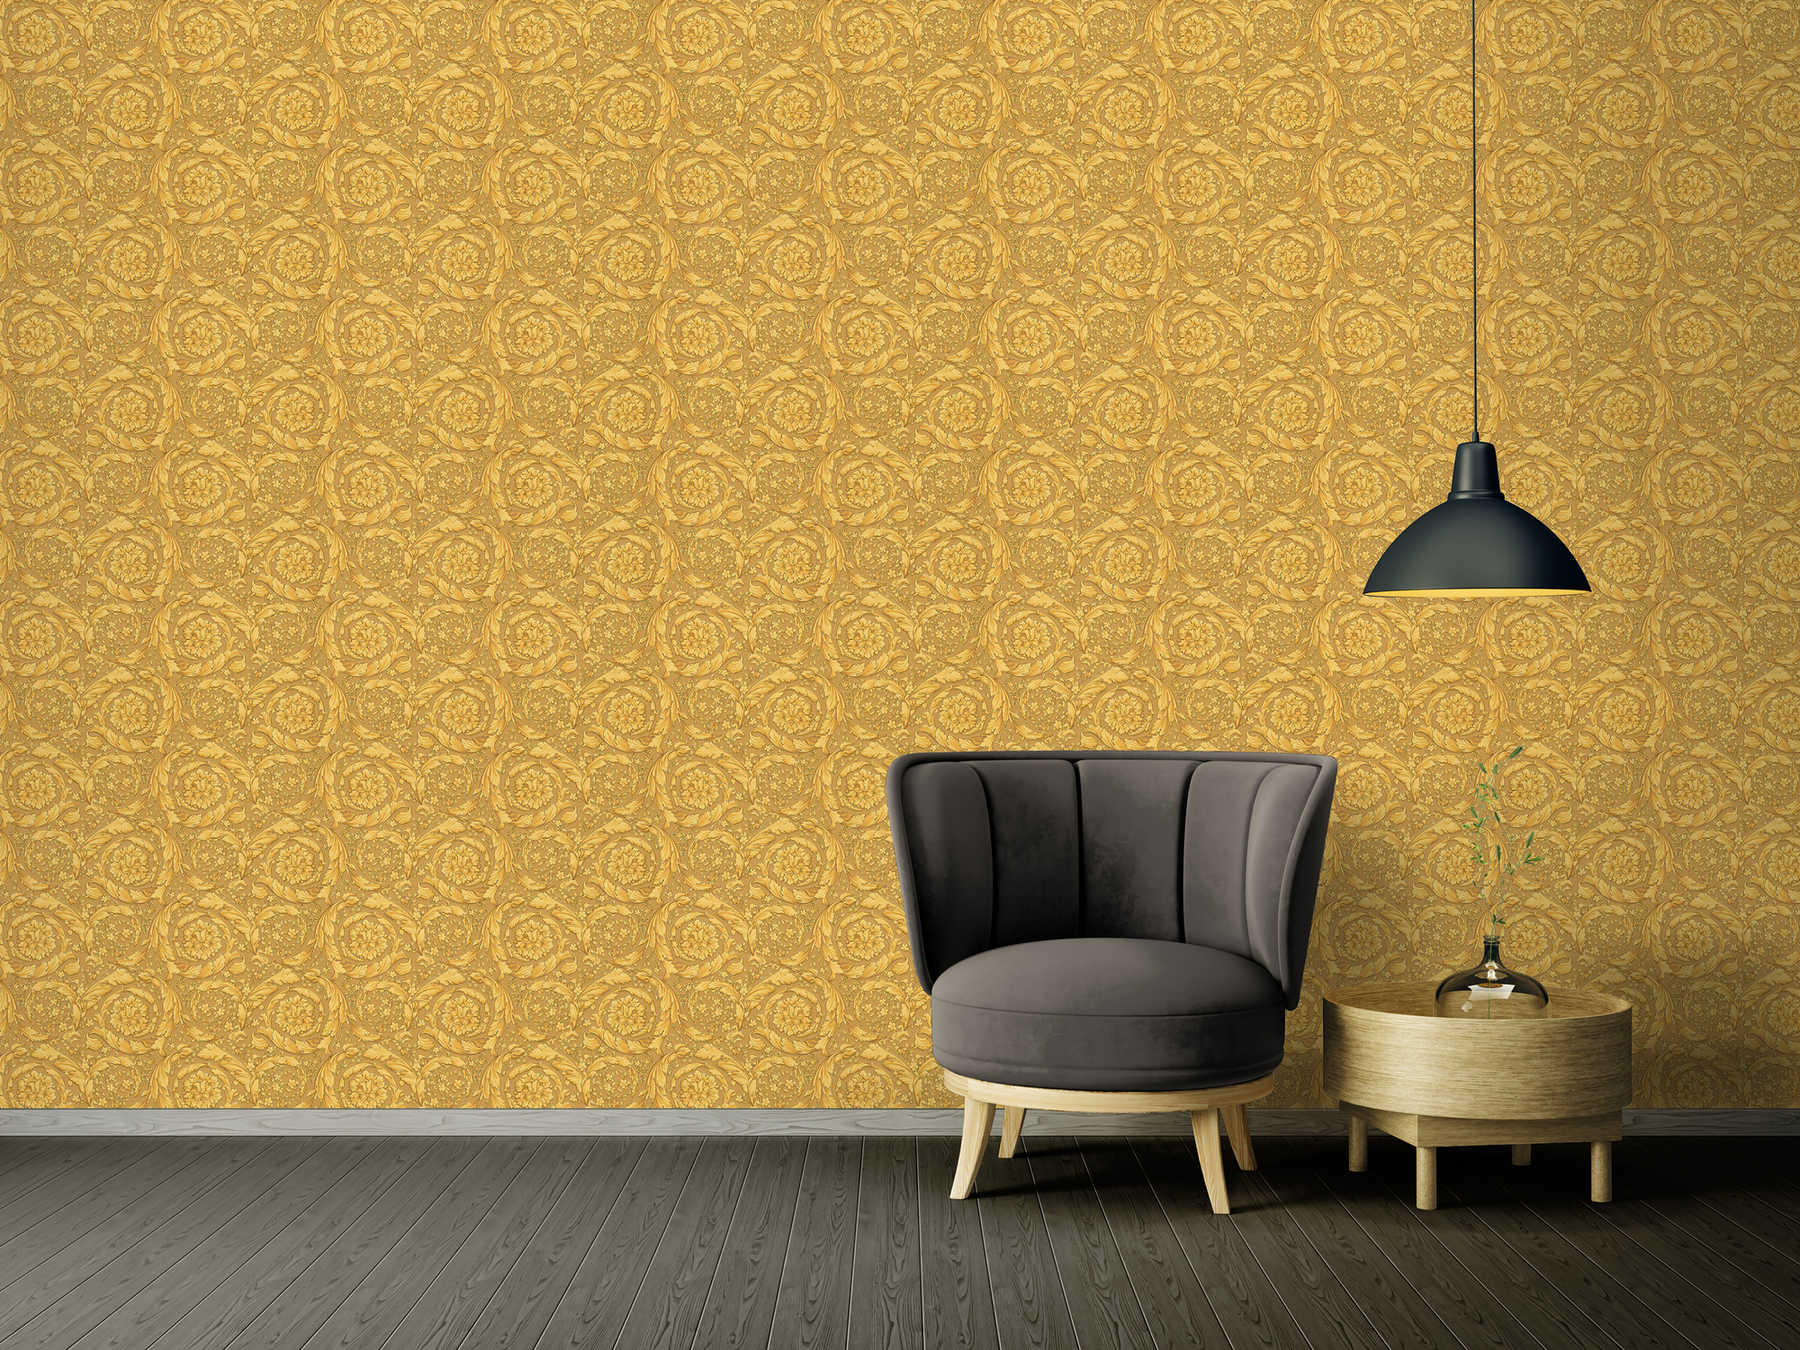             VERSACE wallpaper with ornamental floral pattern - gold
        